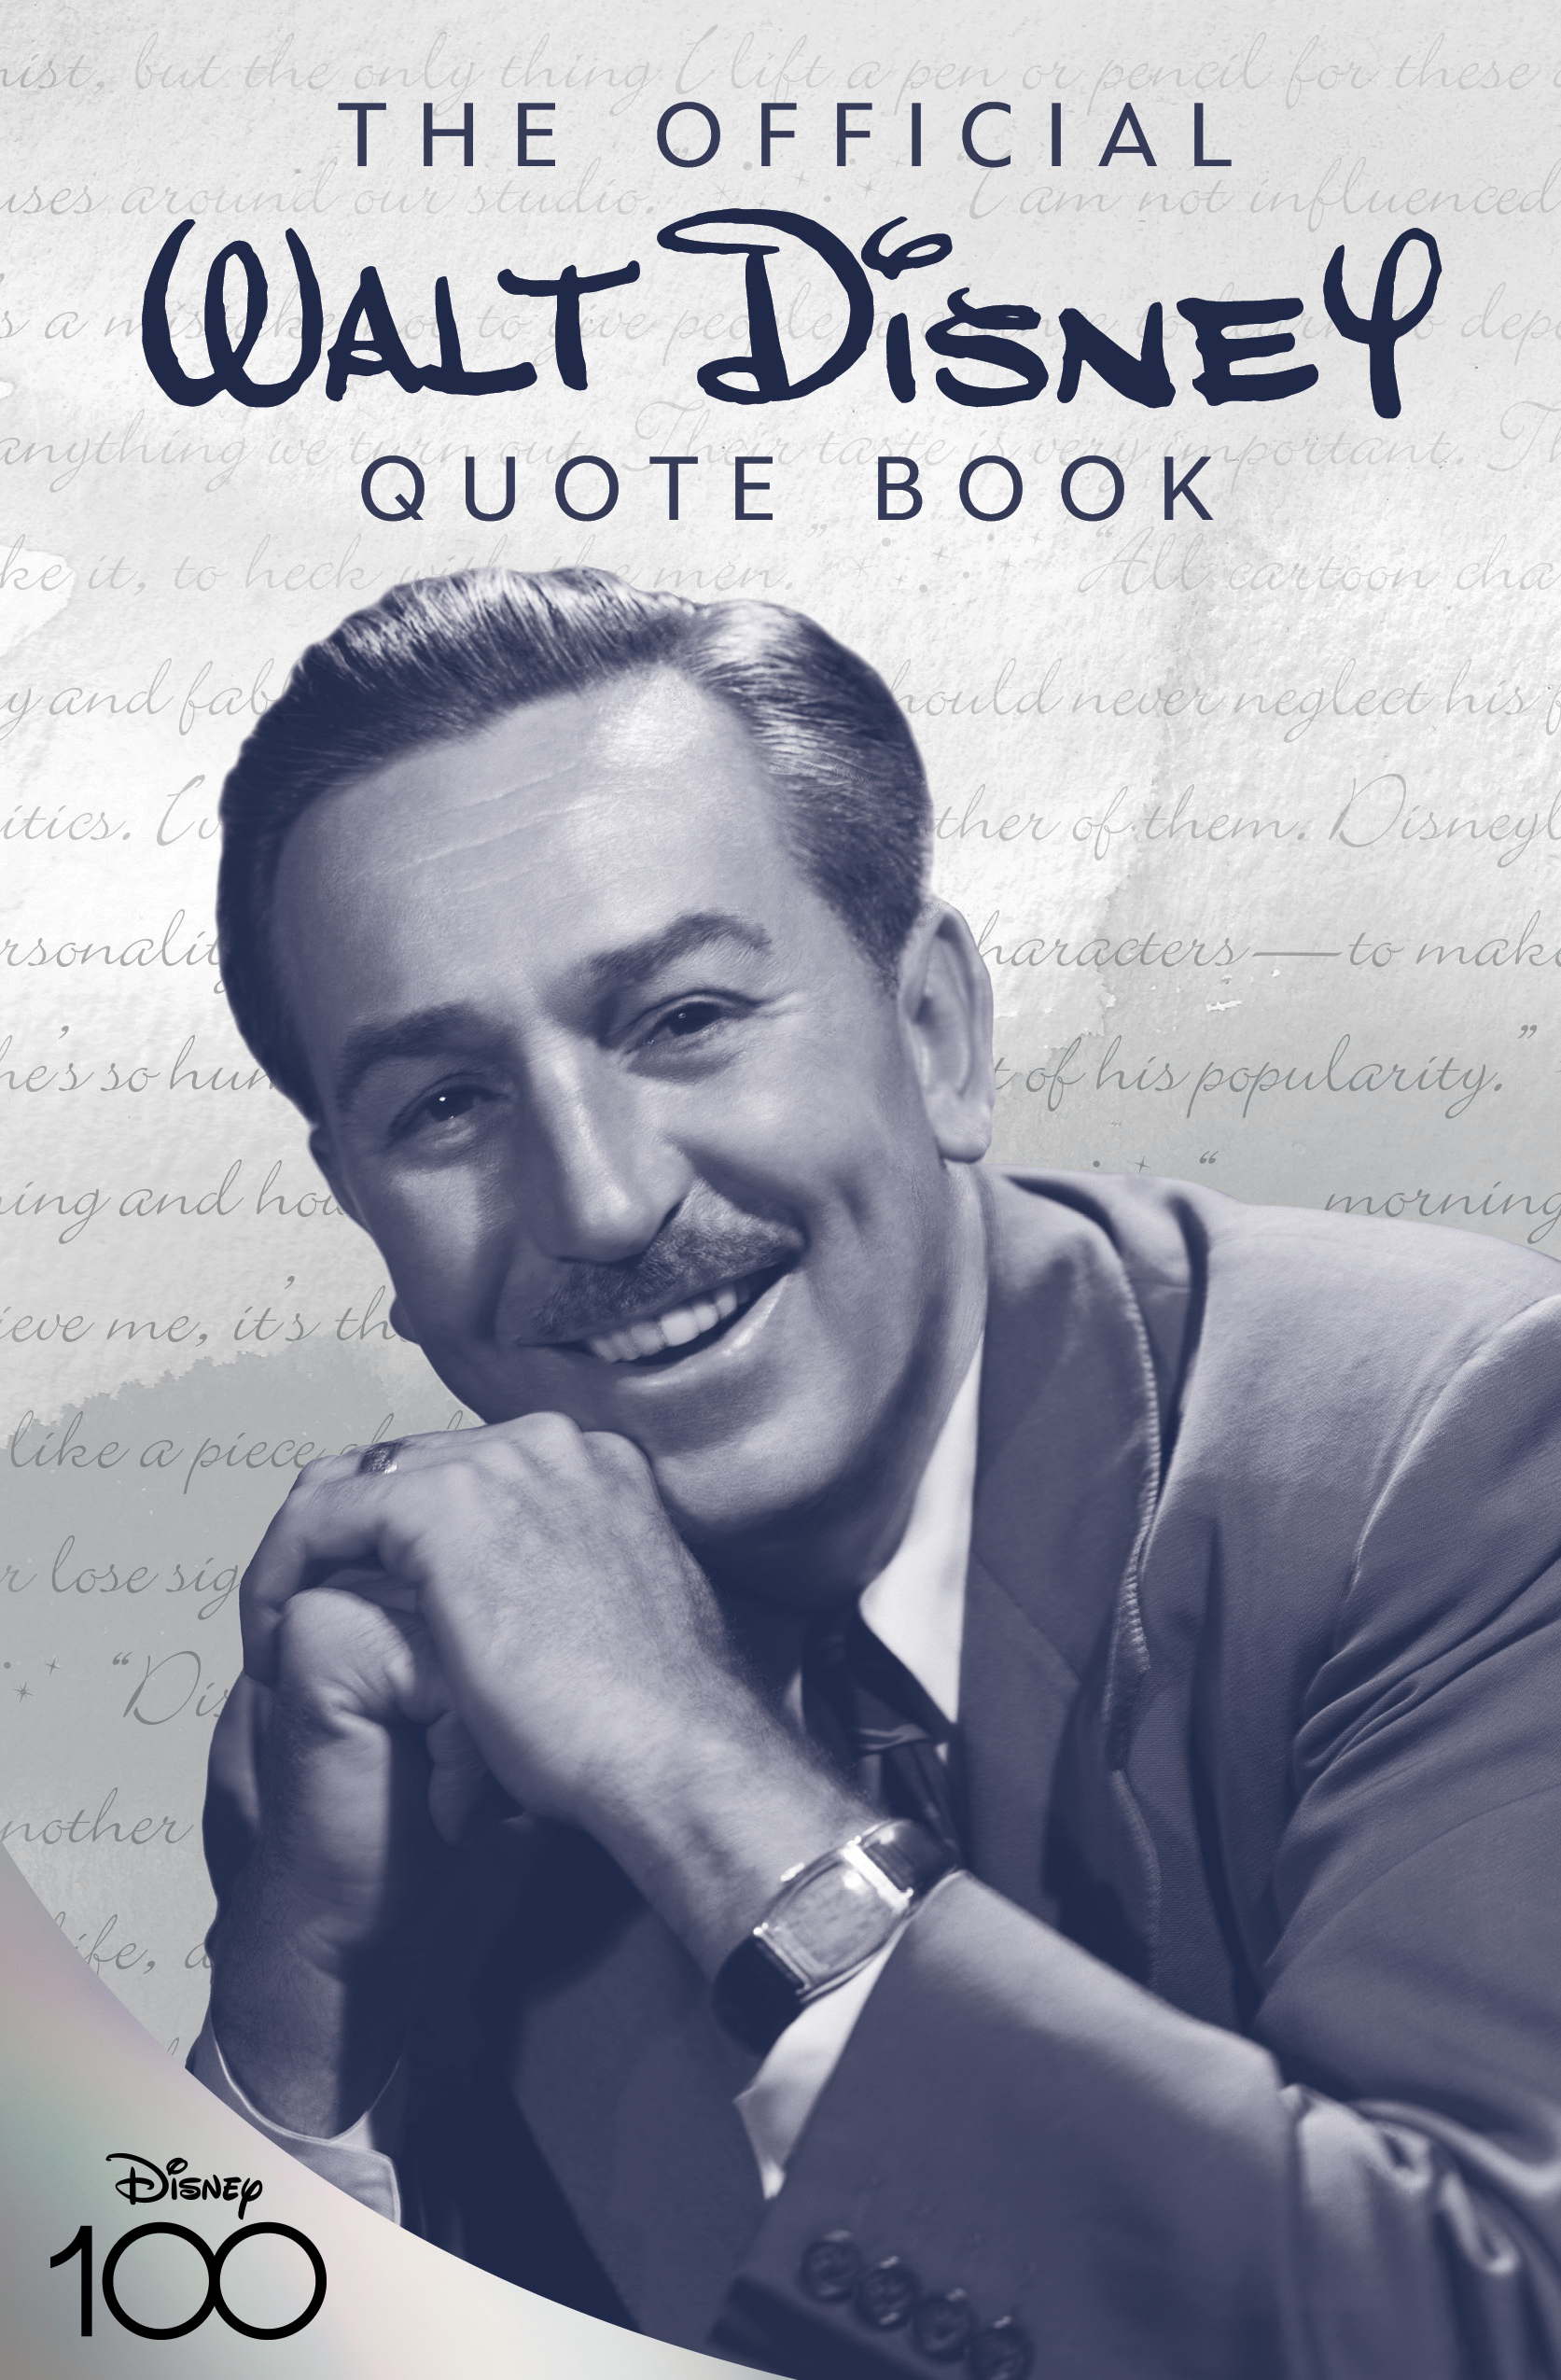 walt disney quotes about life